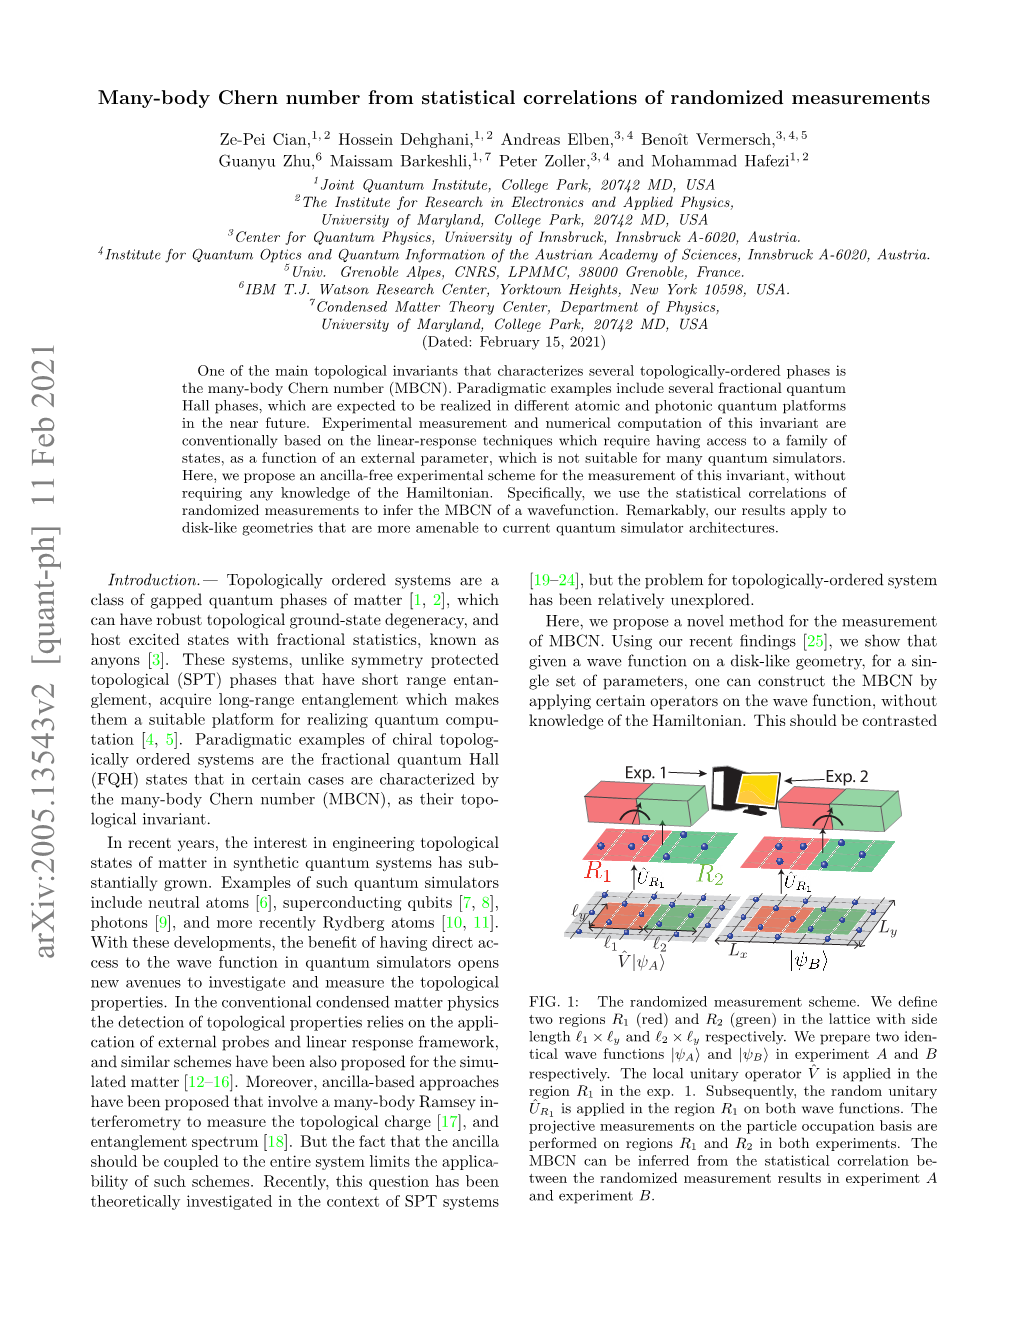 Many-Body Chern Number from Statistical Correlations of Randomized Measurements